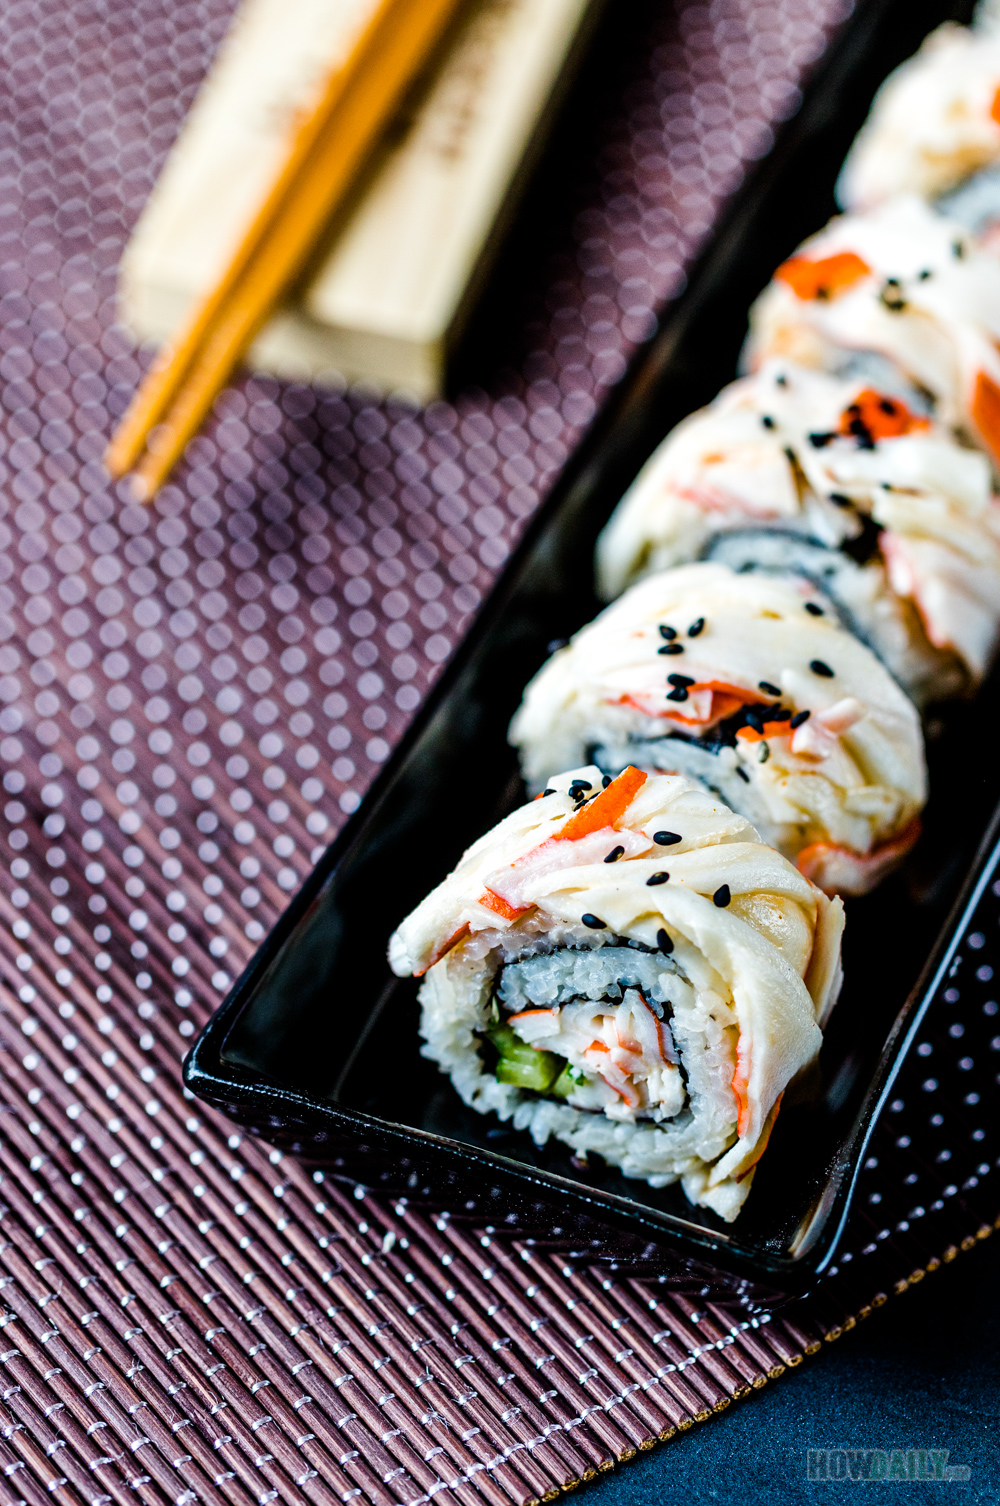 Spicy Crab Roll Recipe - How To Make Spicy Crab Rolls